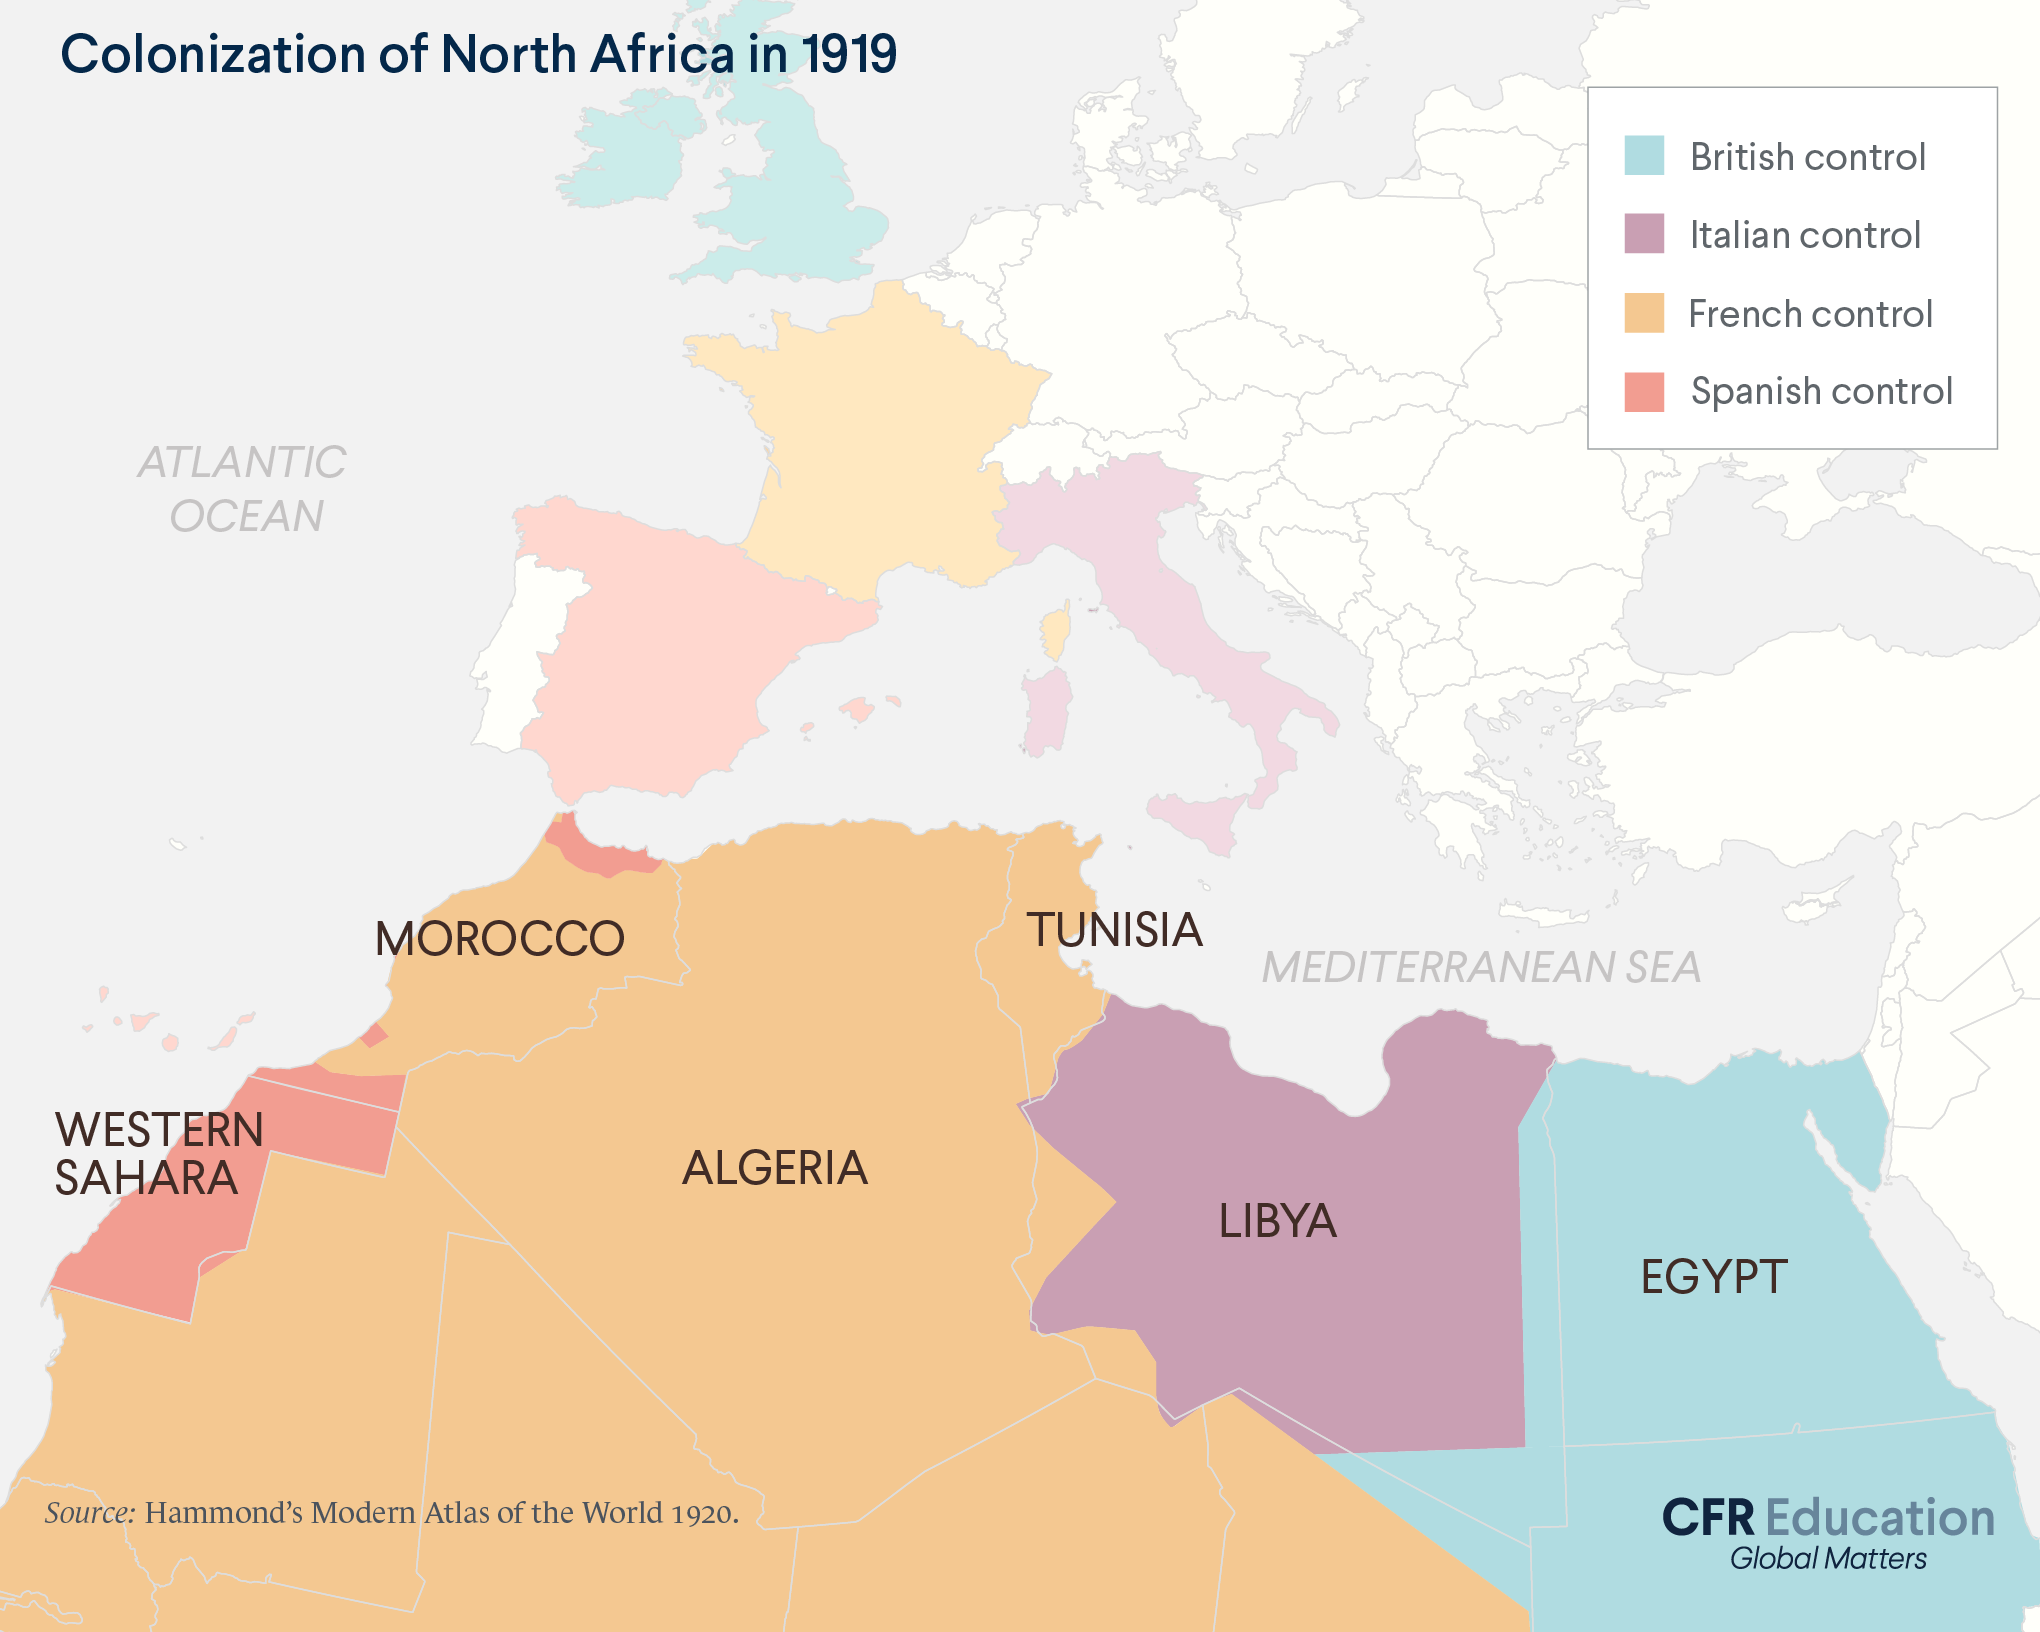 Map shows the colonization of North Africa in 1919, including areas under British, Italian, French, or Spanish control. Source: Hammond's Modern Atlas of the World 1920. For more info contact us at cfr_education@cfr.org.